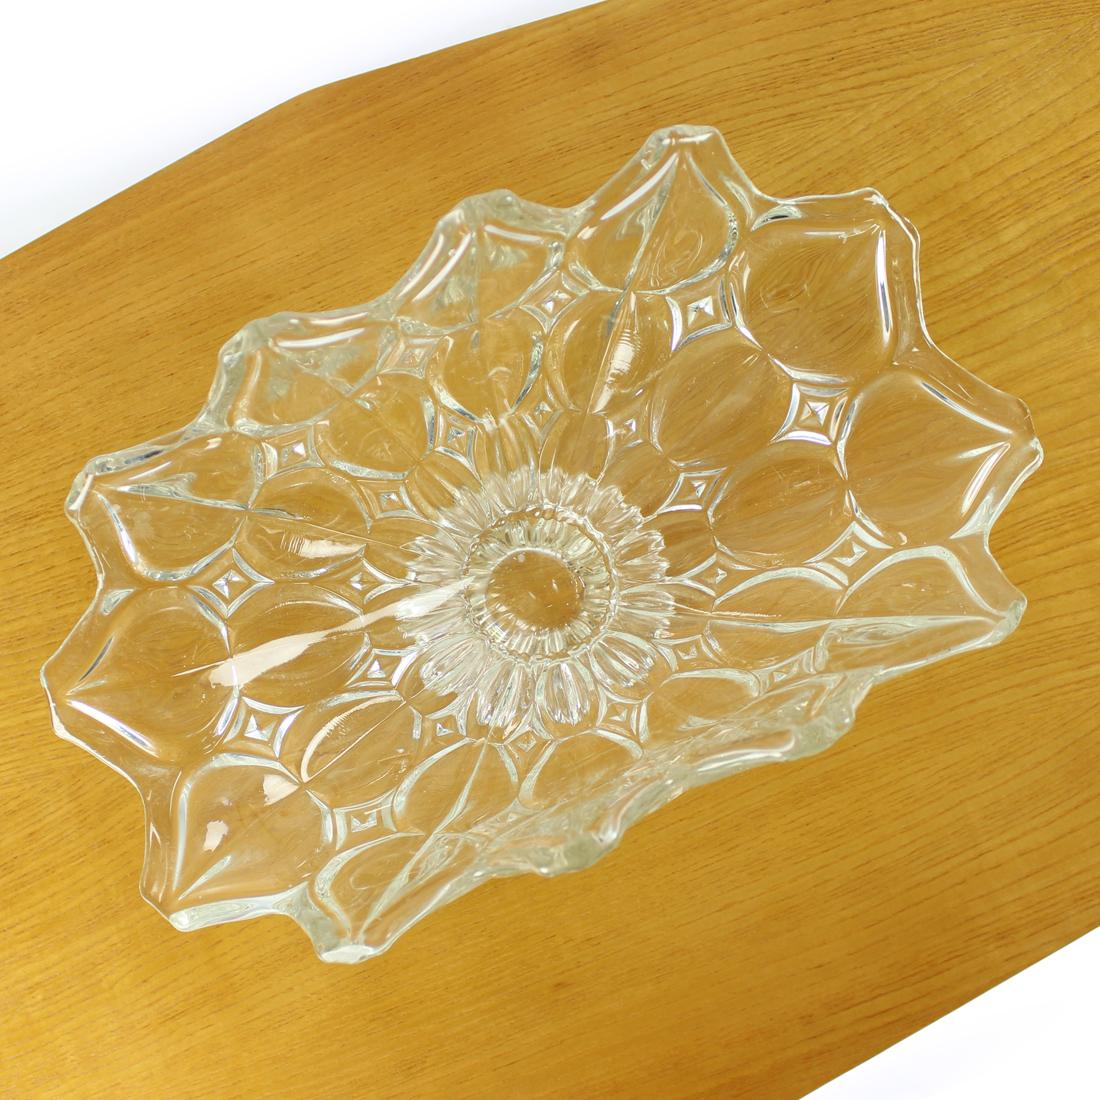 Large Pressed Glass Bowl, Tulip Collection Hermanowa Hut, 1957 For Sale 4